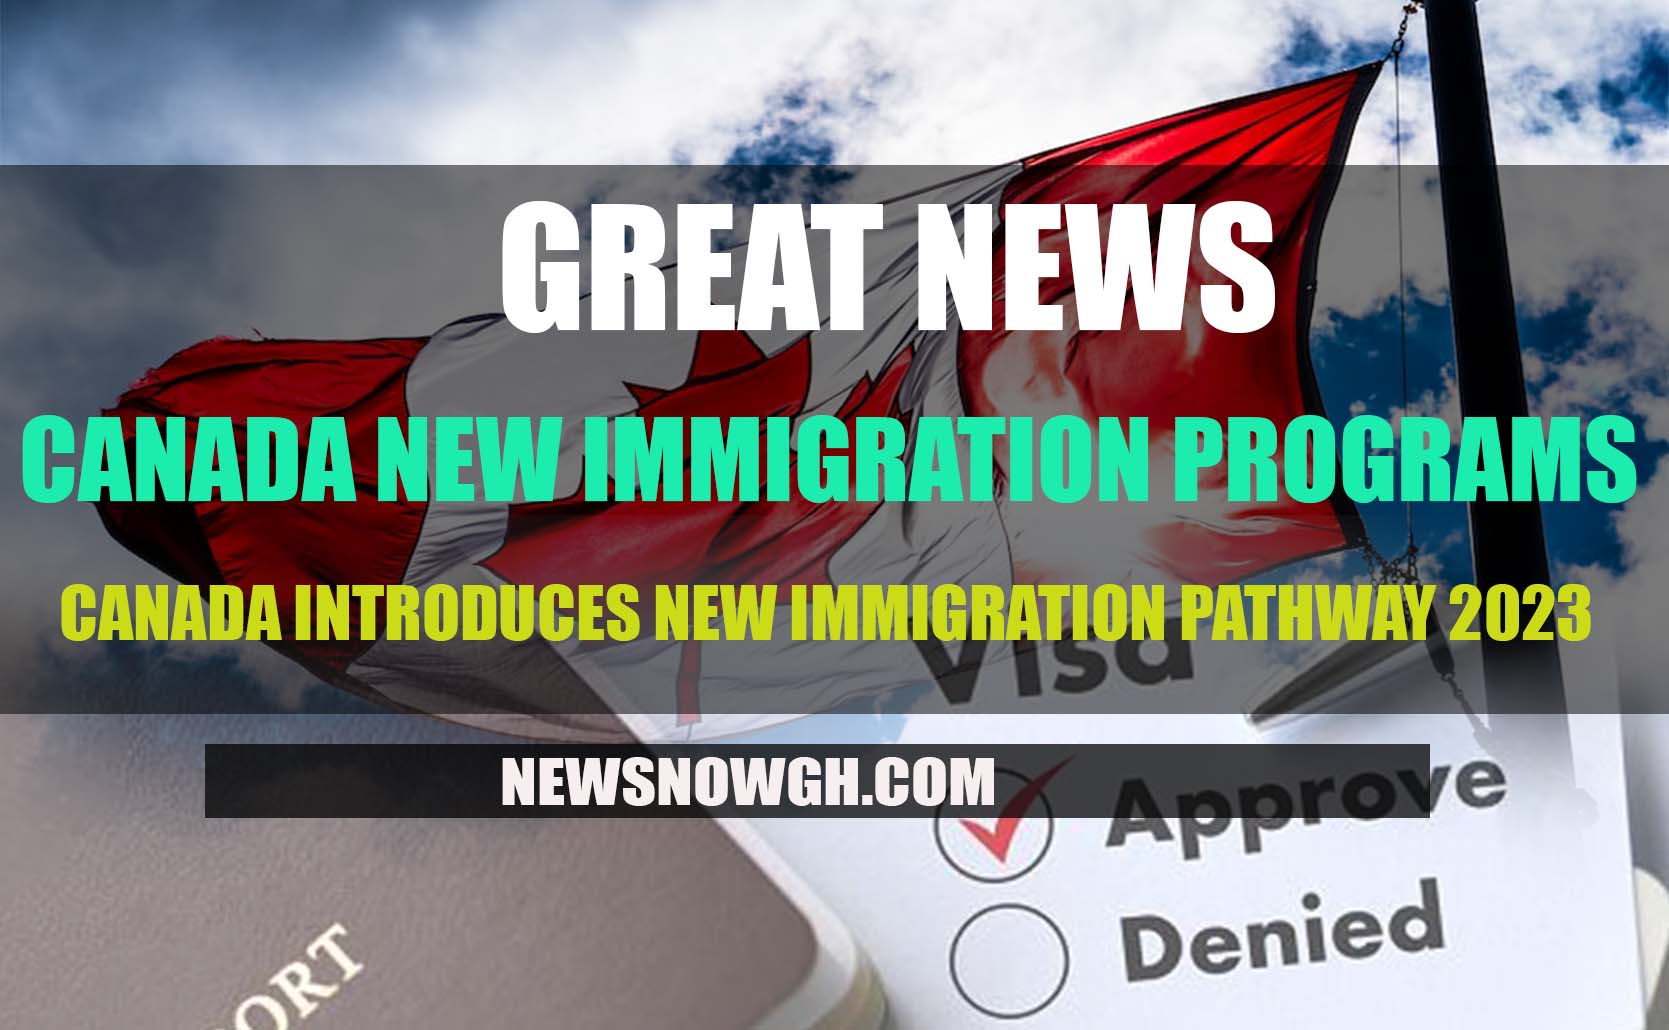 Canada Introduces New Immigration Pathway 2023